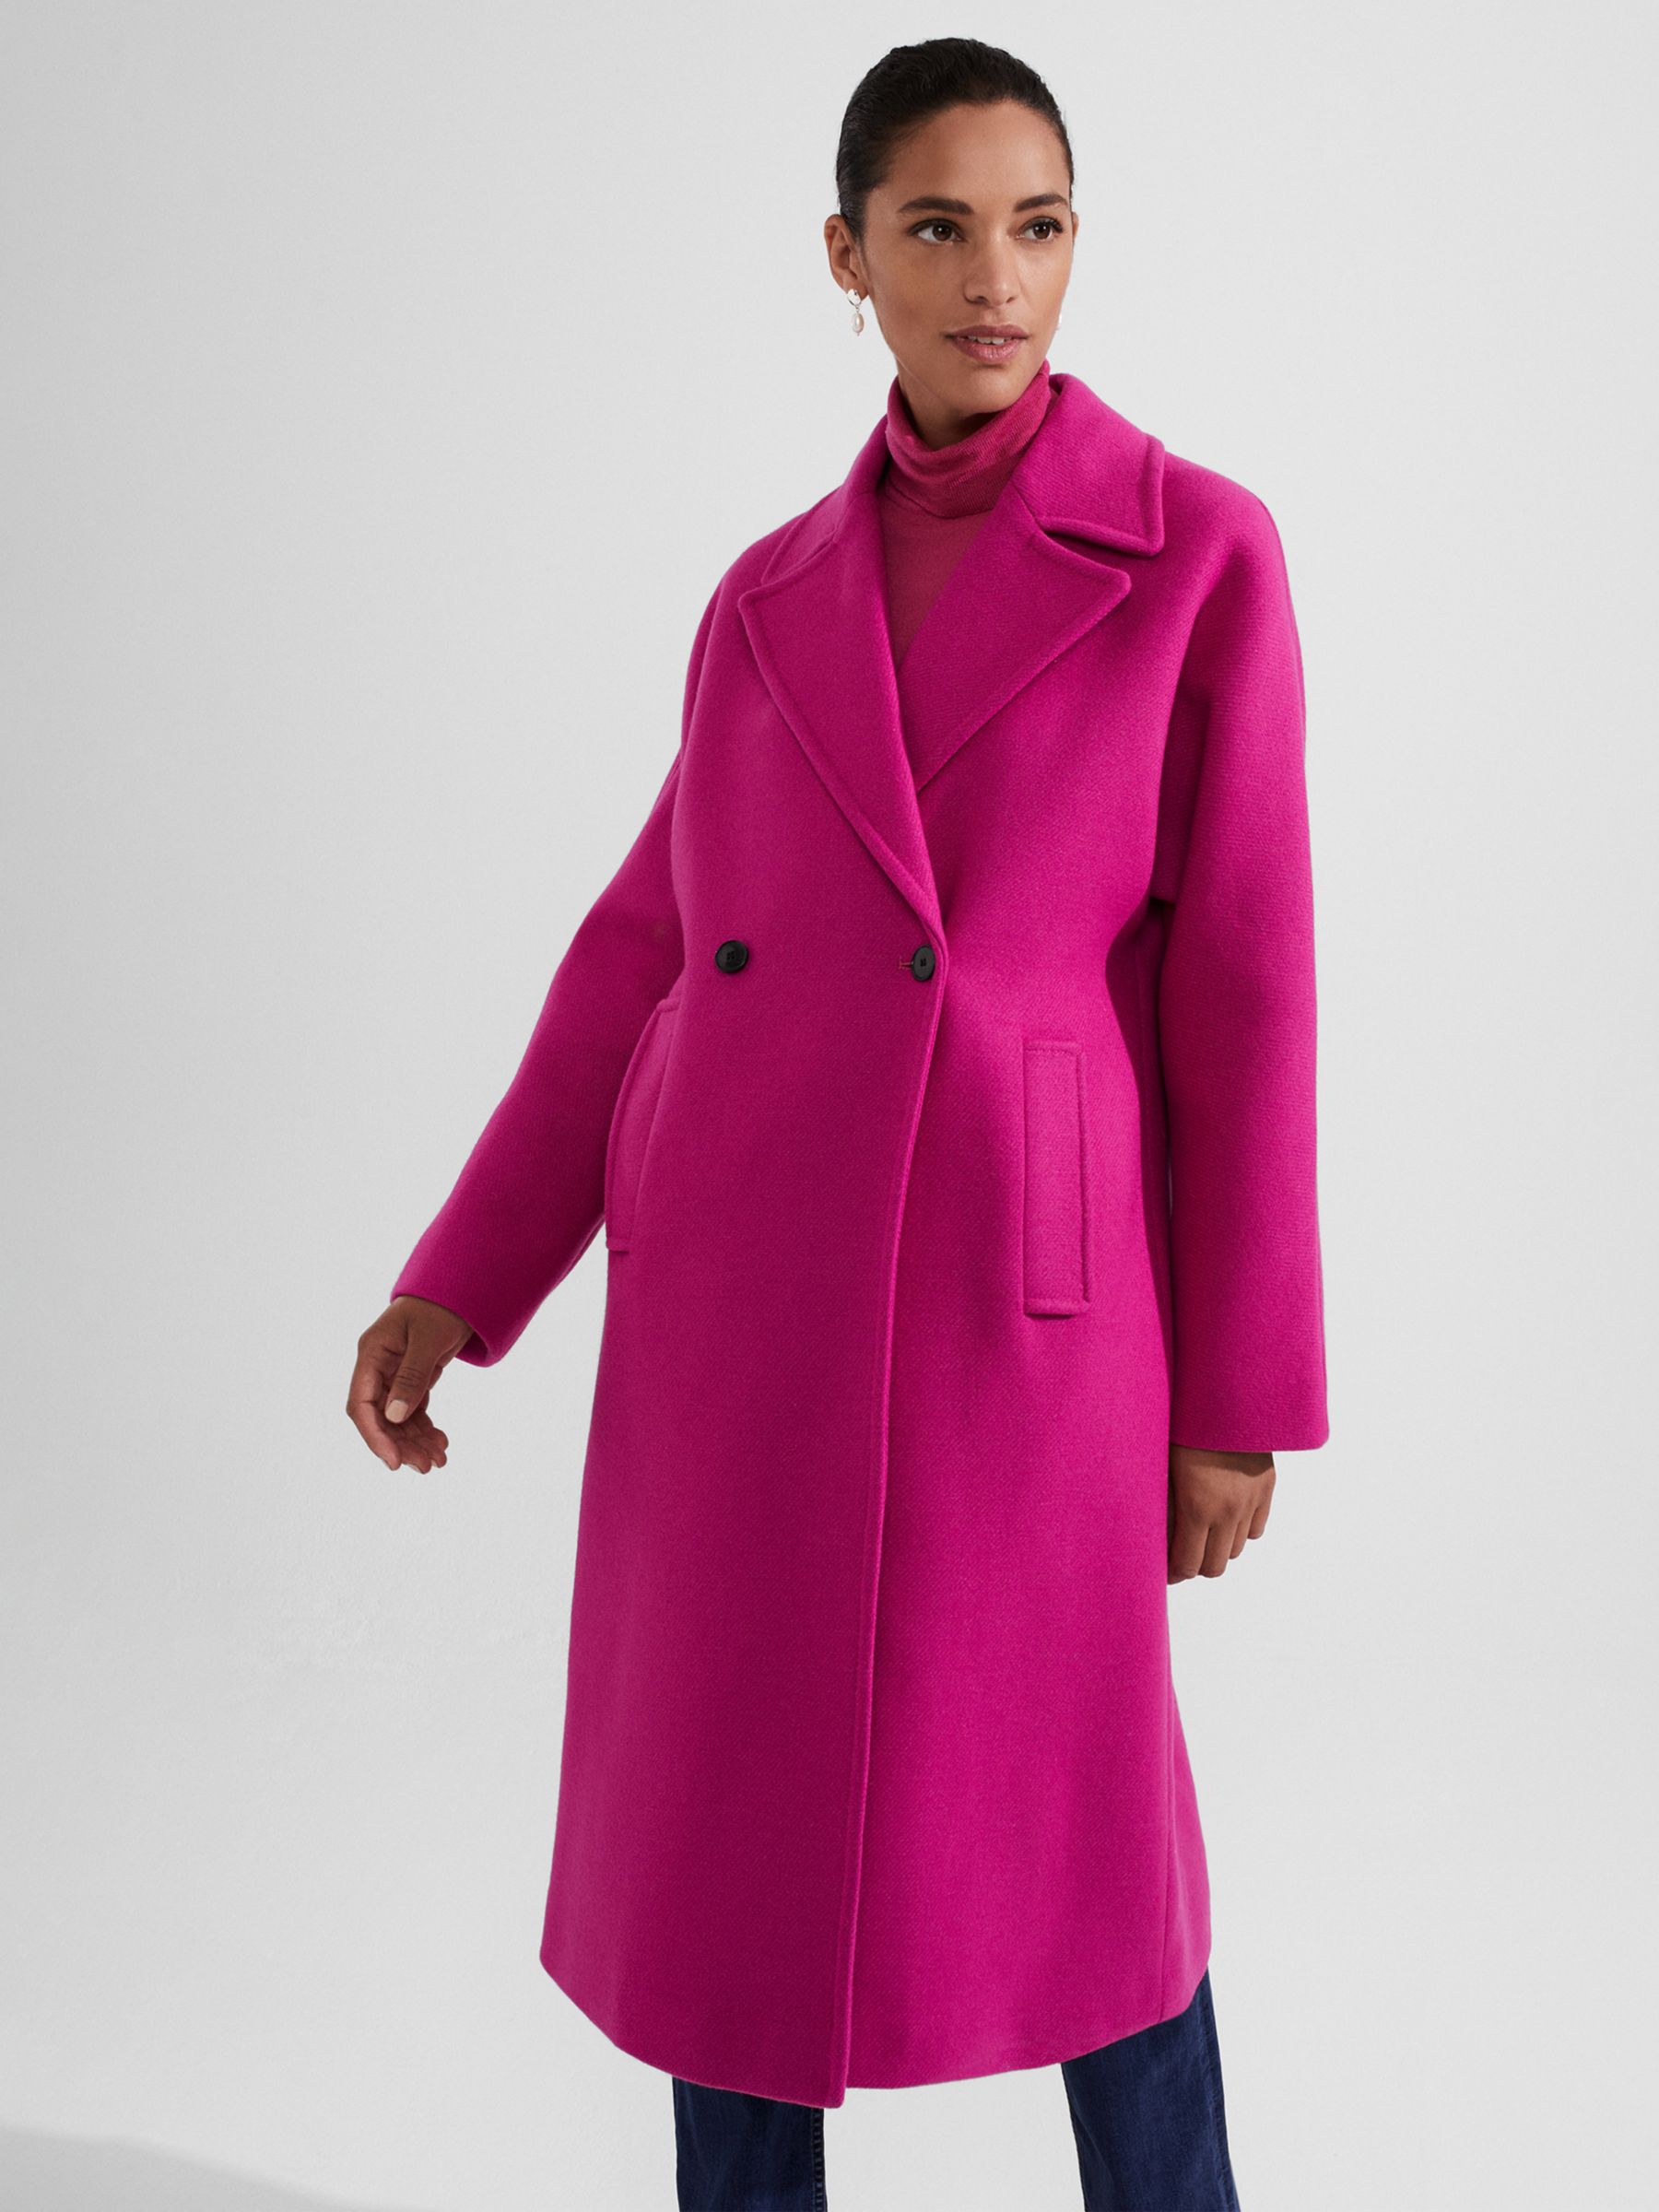 Hobbs Carine Wool Blend Relaxed Fit Coat, Bright Pink at John Lewis ...